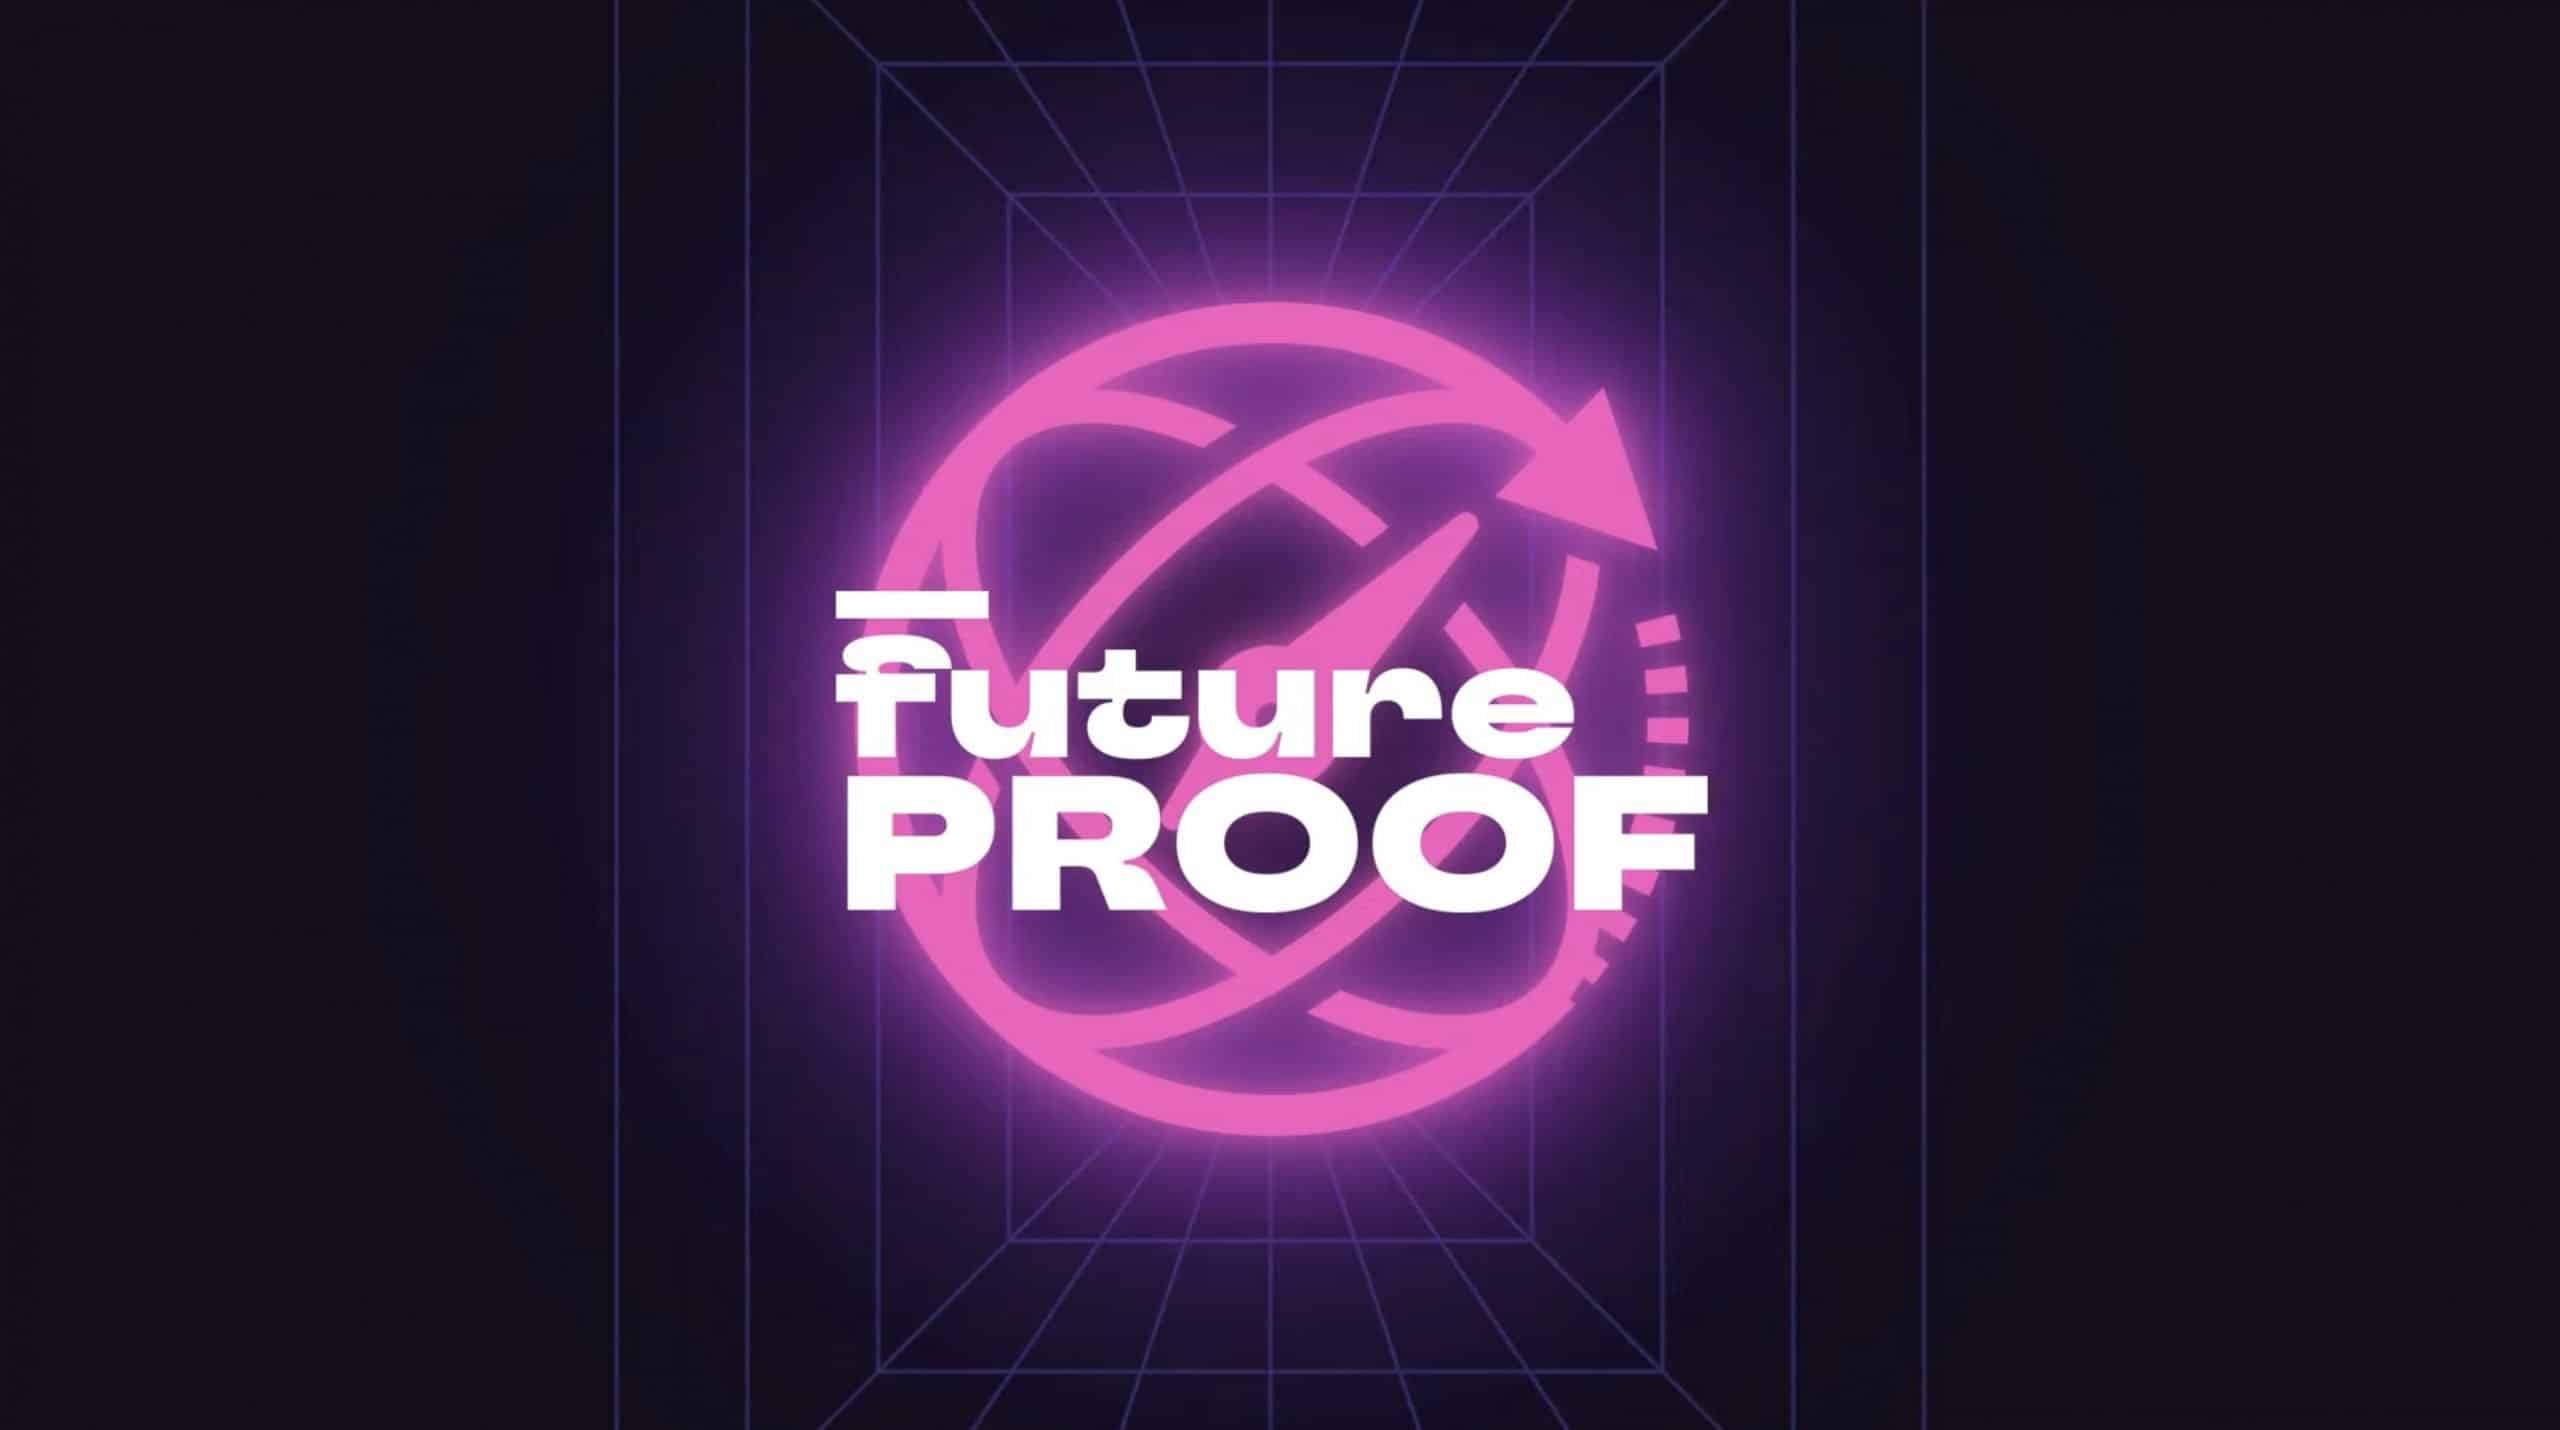 PROOF Announces Several NFT Events and Curated Art Drop